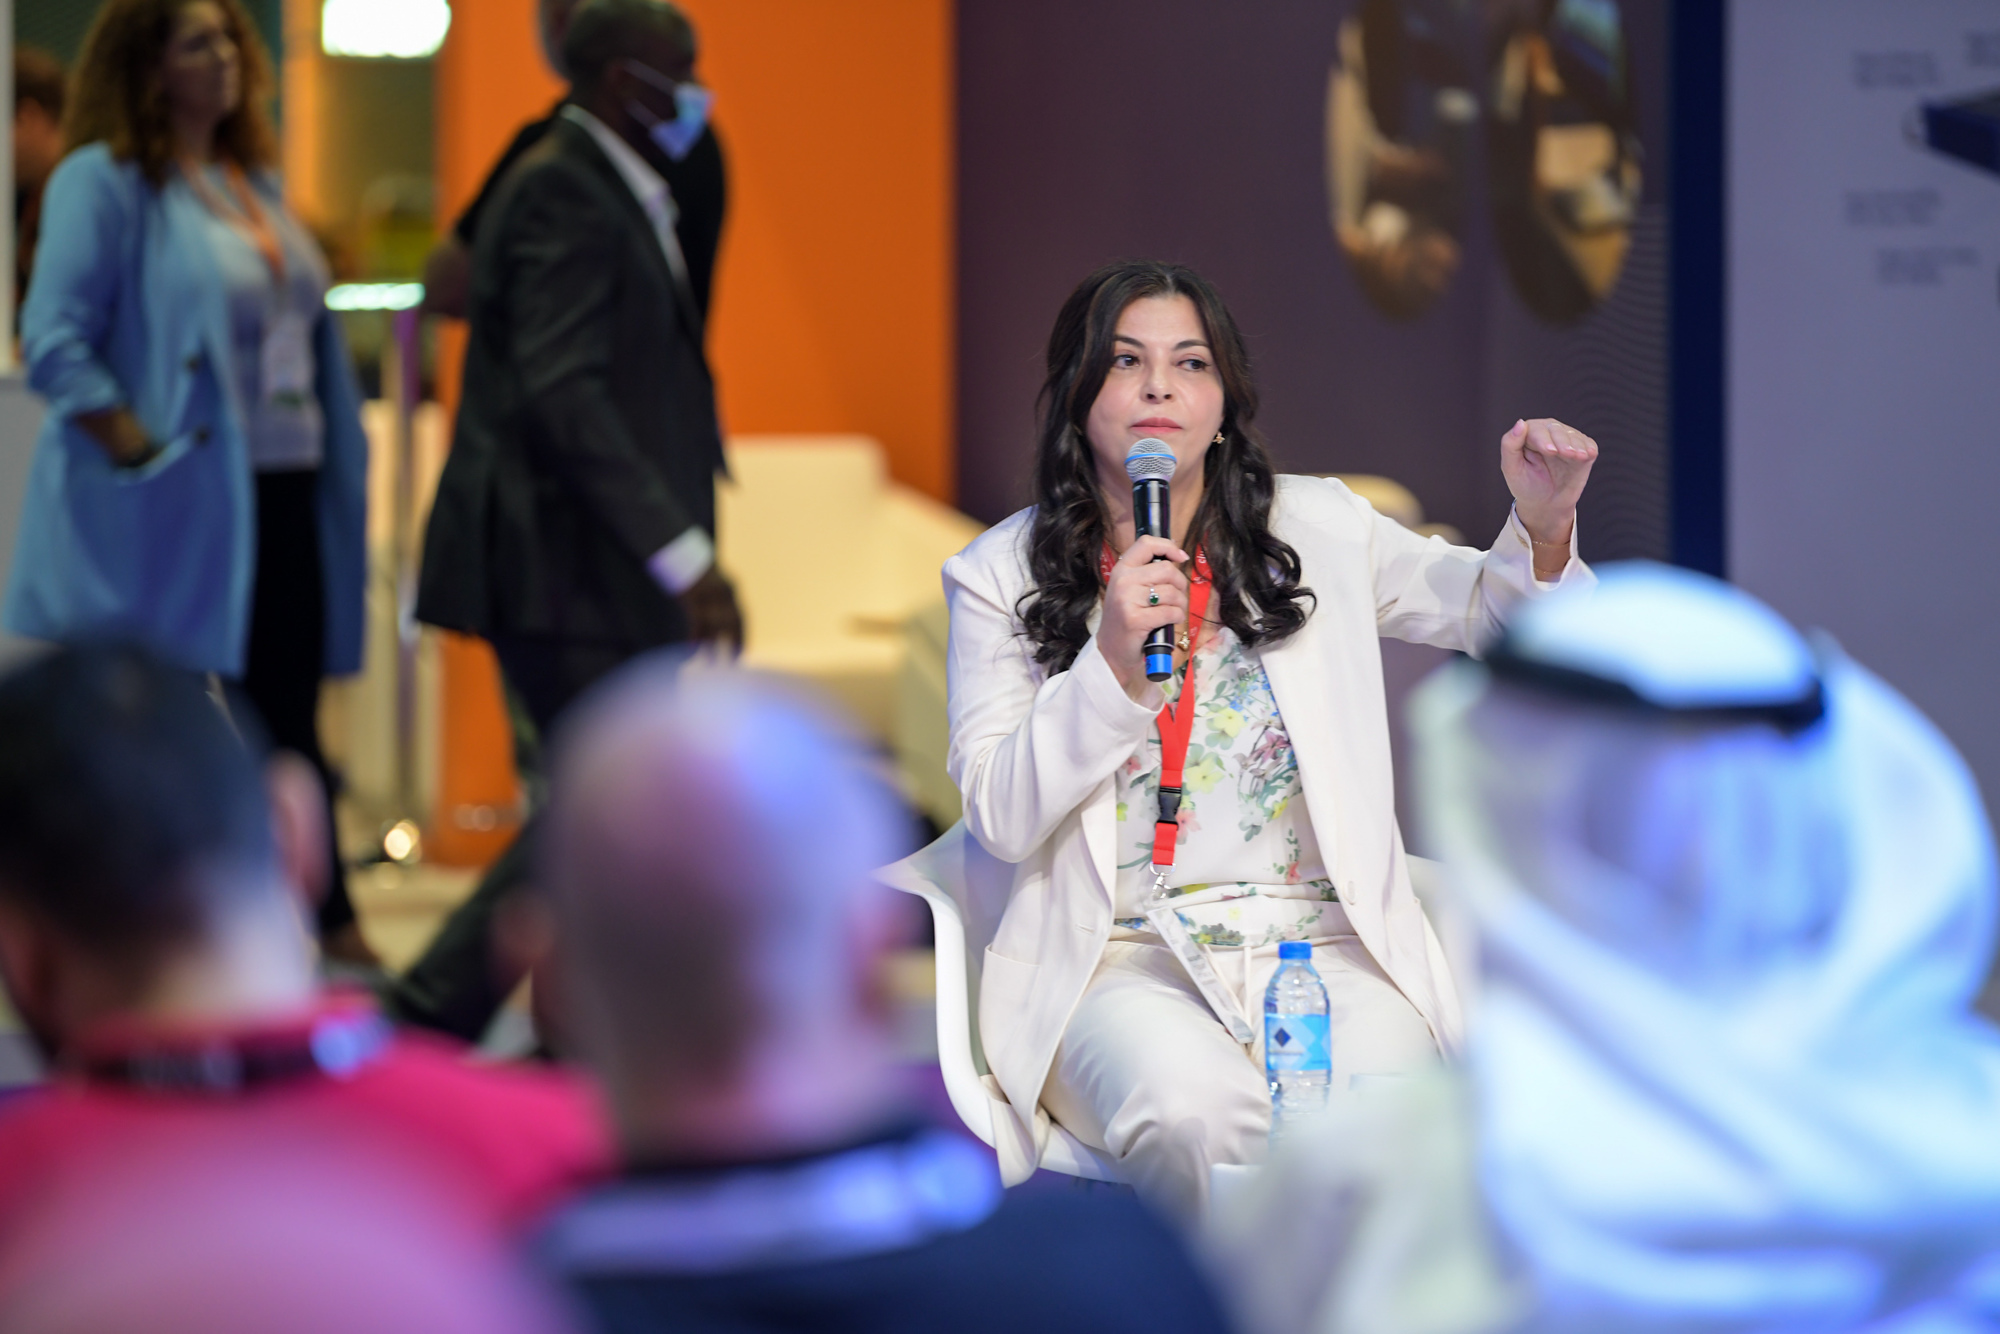 First-of-its-kind UAE TV viewership research launched at CABSAT 2022, revealing figures for more than half the population